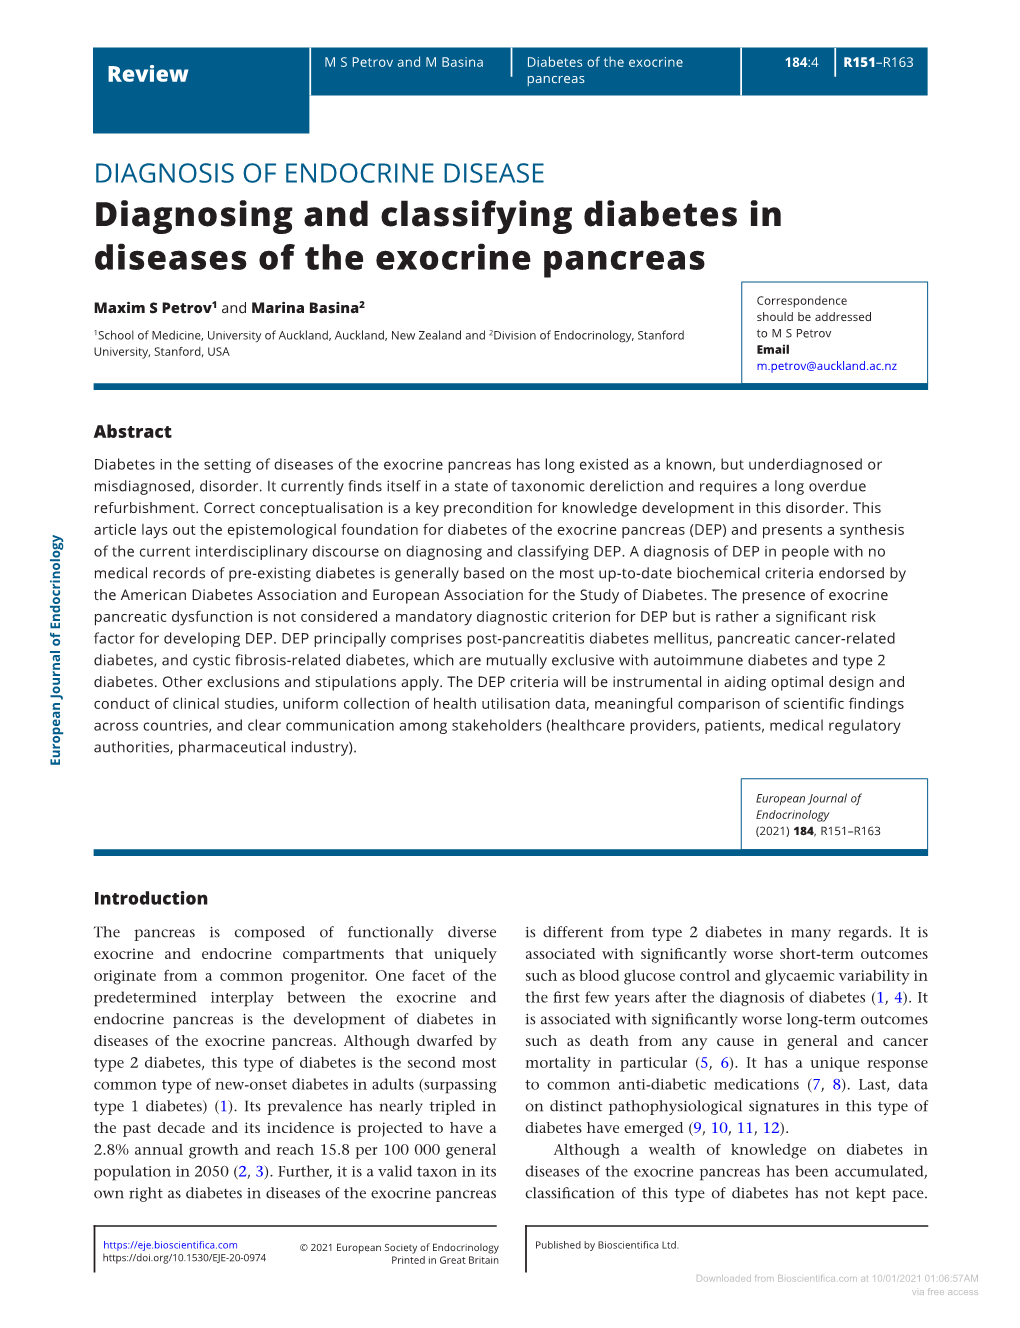 Diagnosing and Classifying Diabetes in Diseases of the Exocrine Pancreas